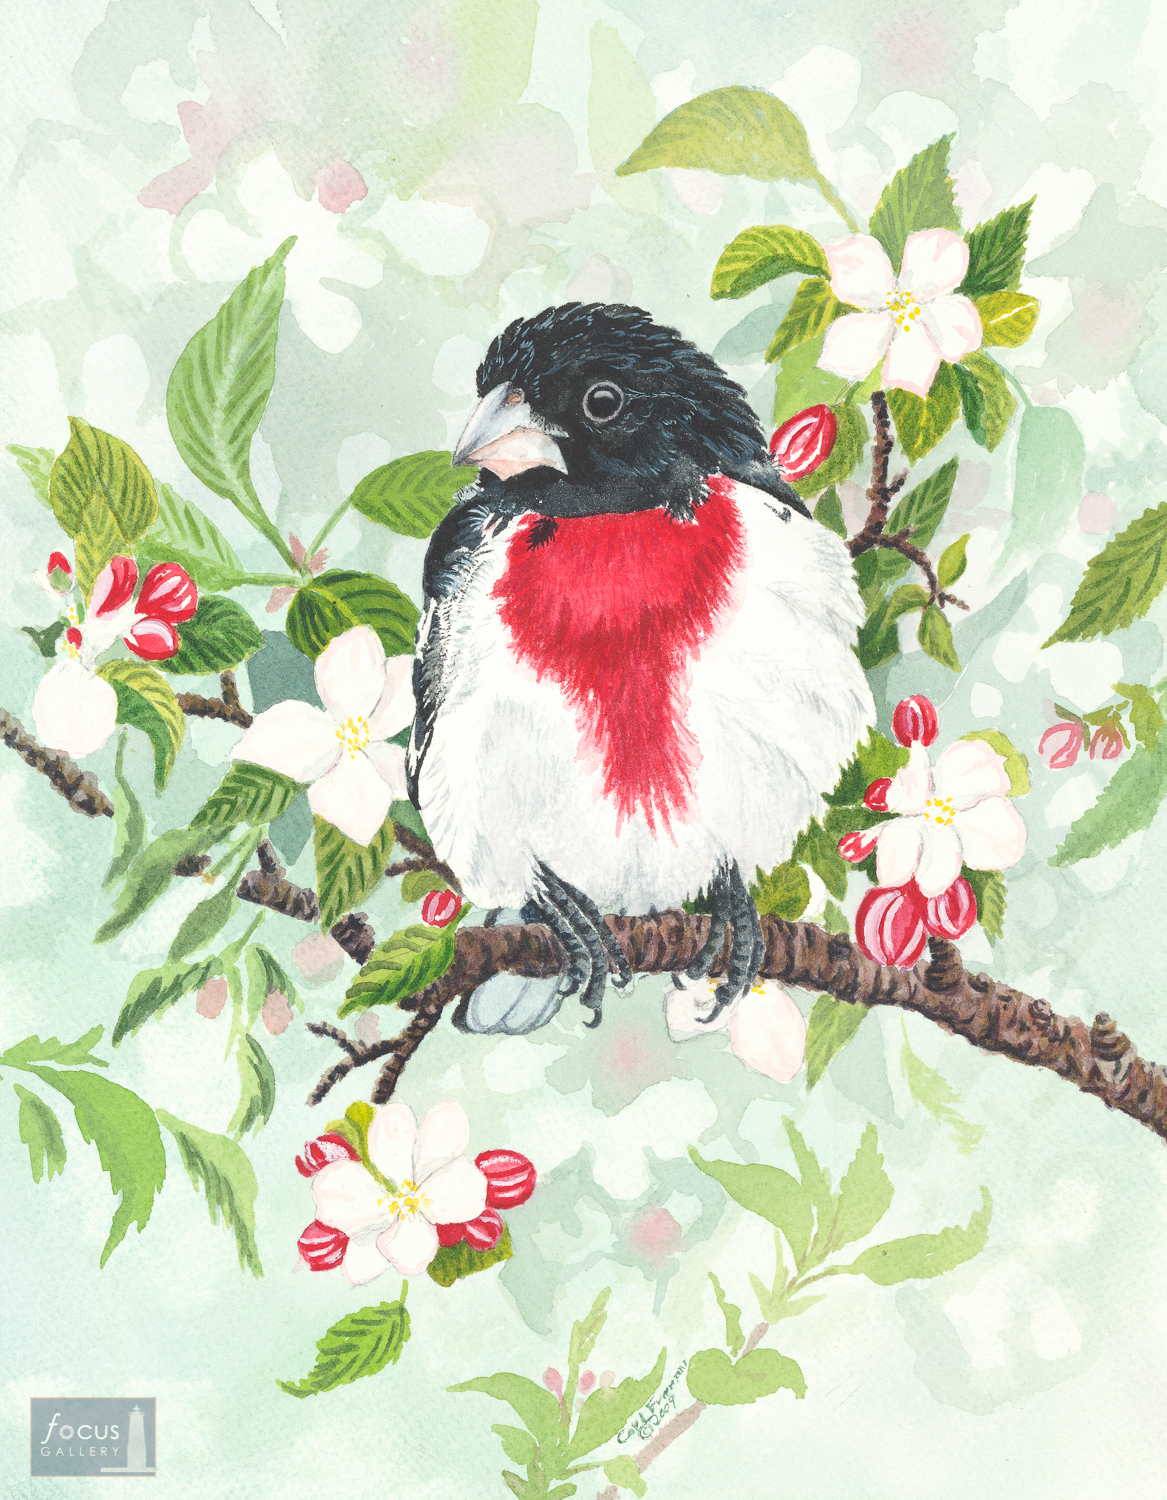 Original watercolor painting of a Rose-breasted Grosbeak bird surrounded by white blossoms.